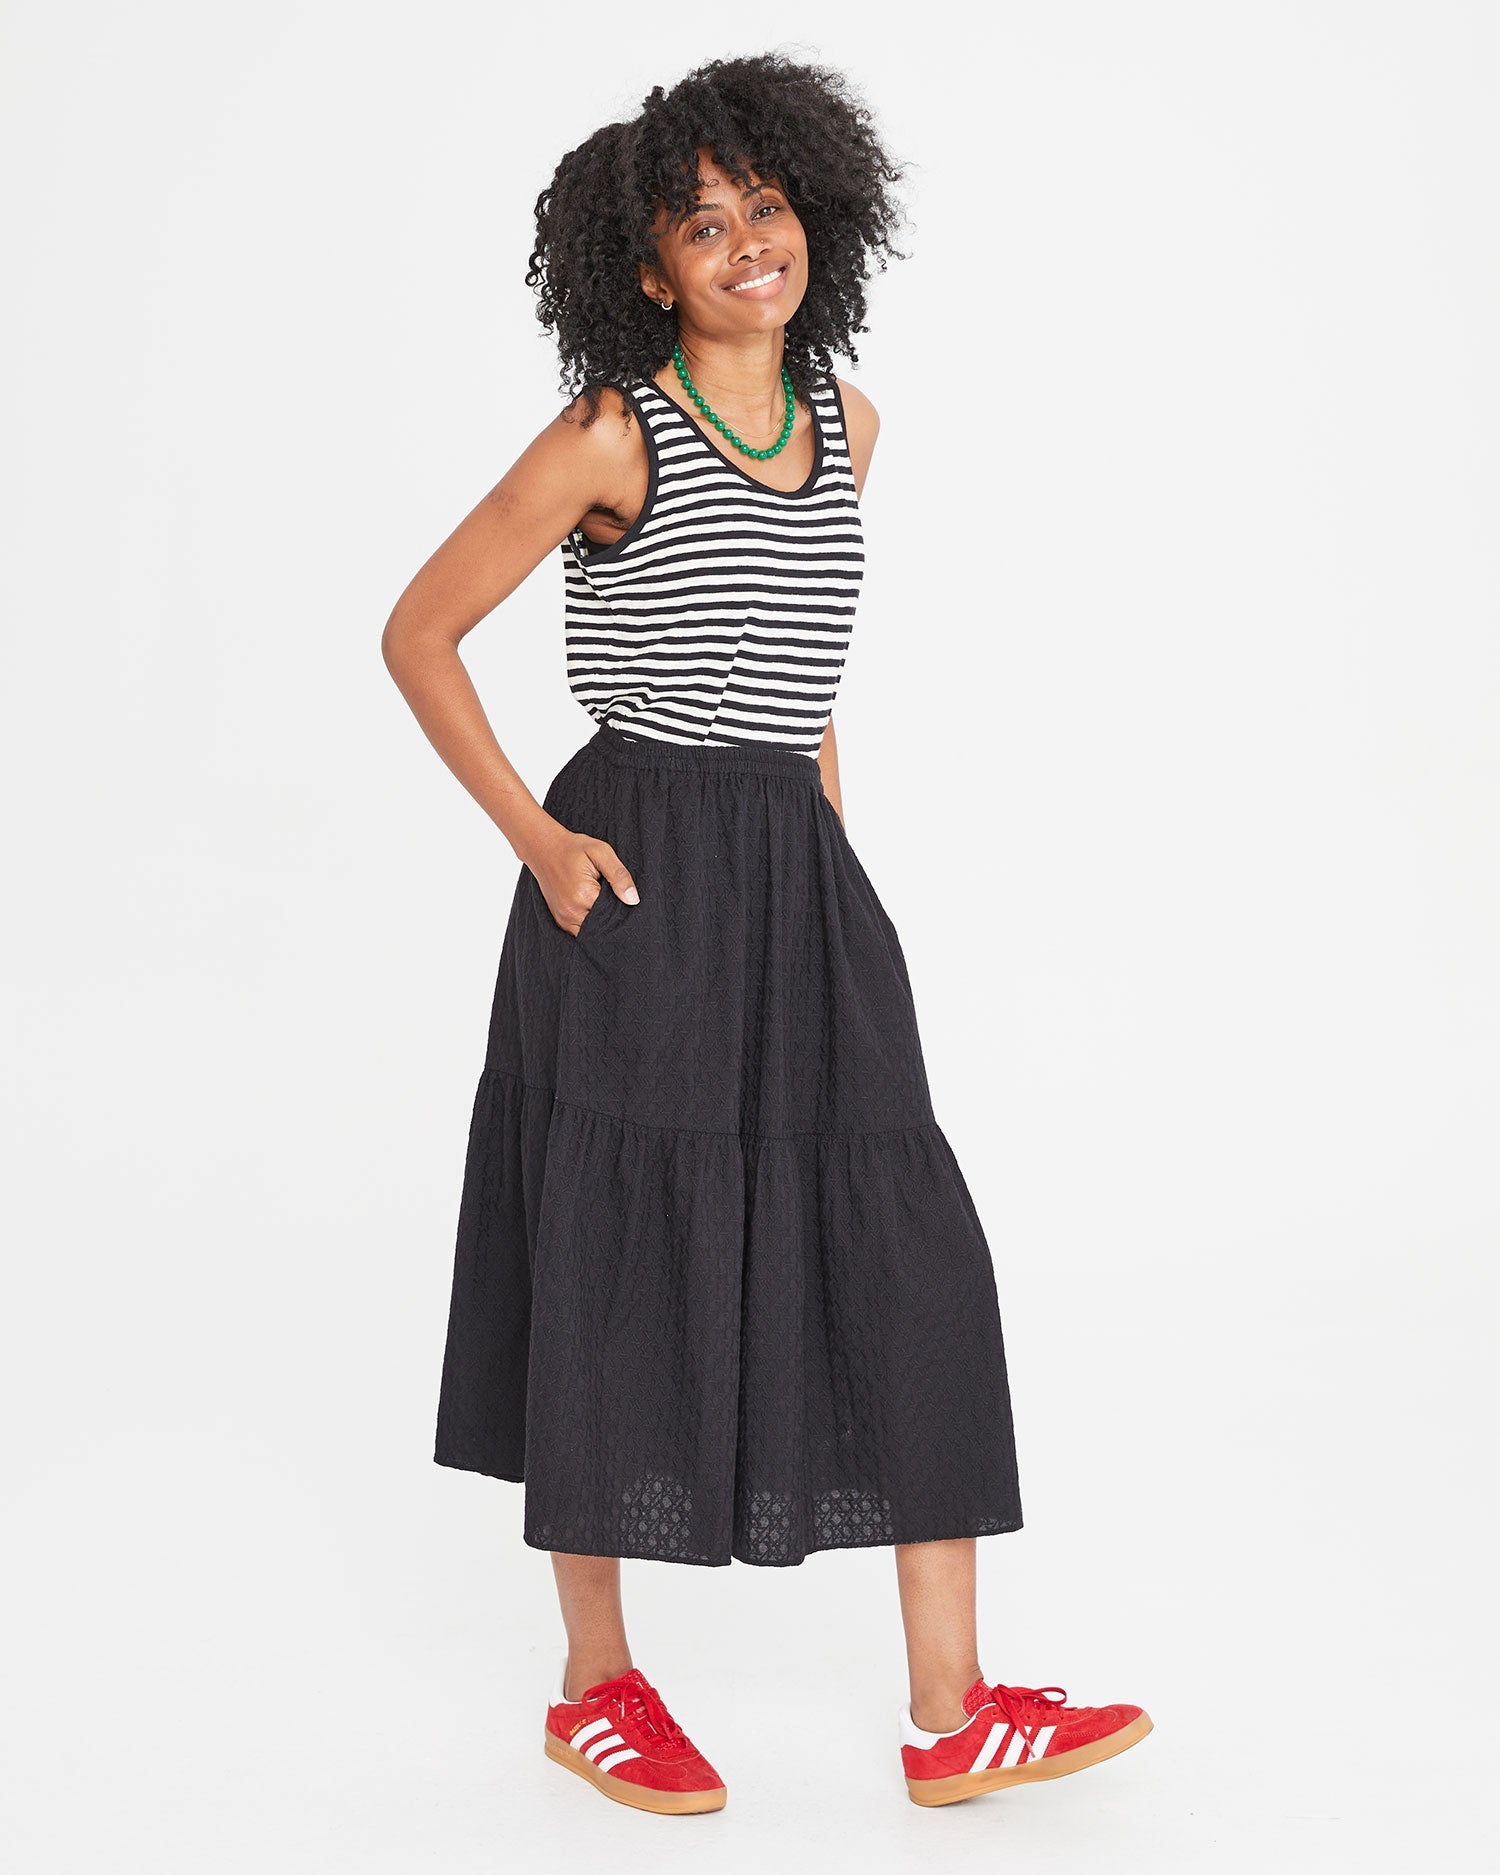 Mecca with her hands in the pockets of the Black Eyelet Rattan Manon Skirt